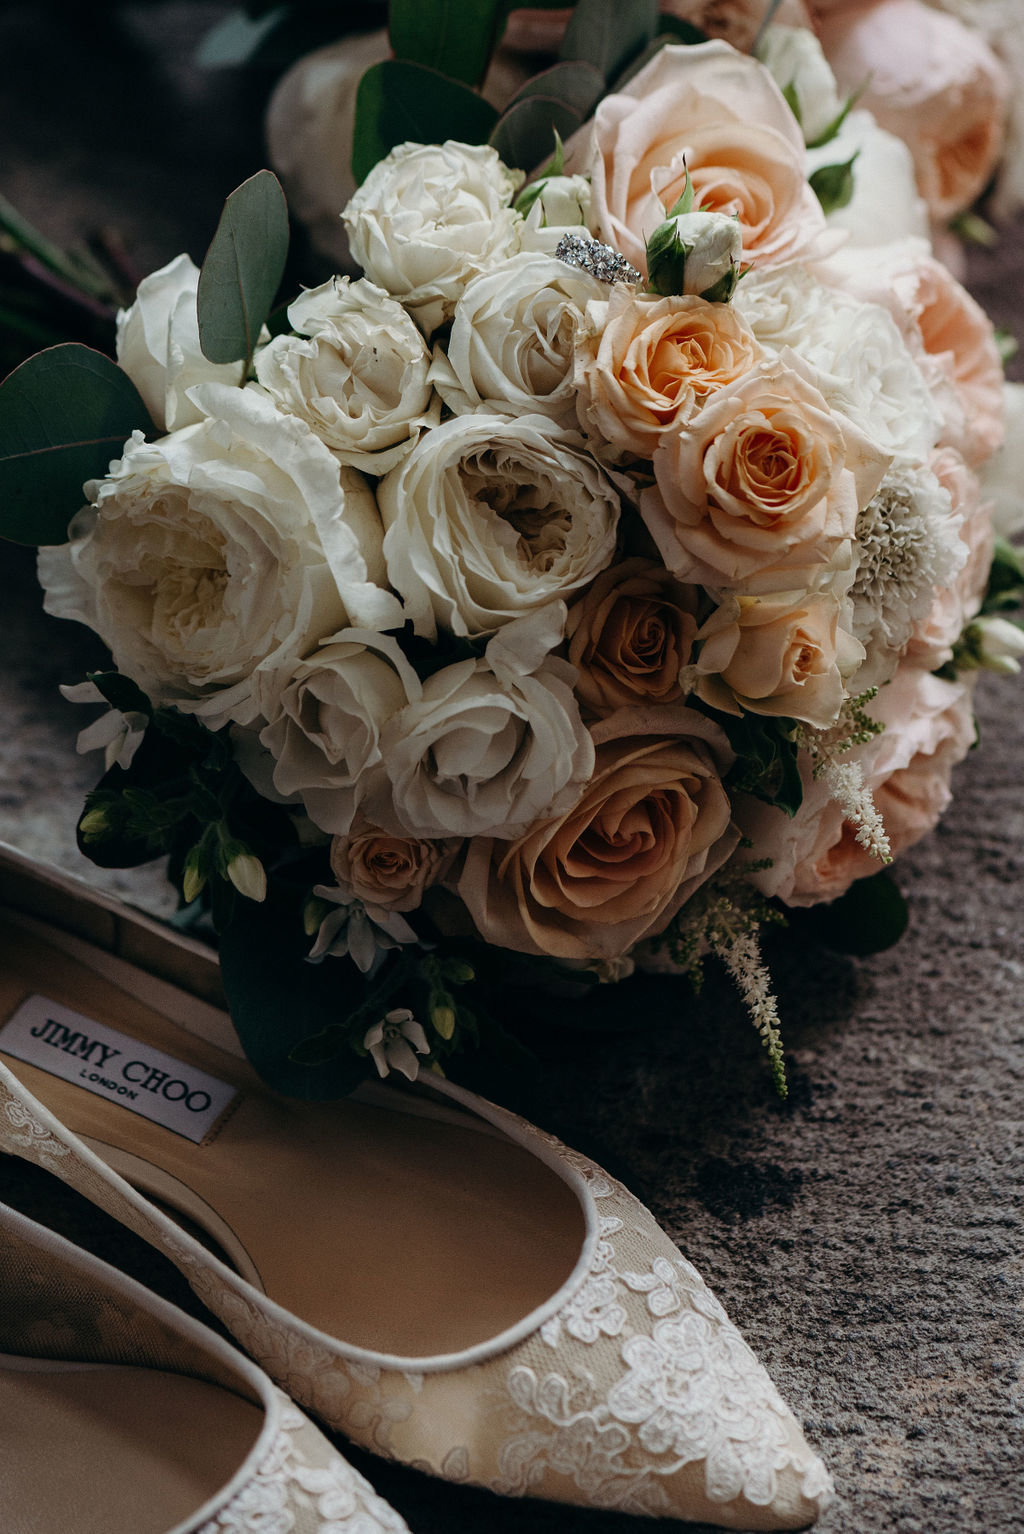 Elegant flowers and old fashioned wedding details